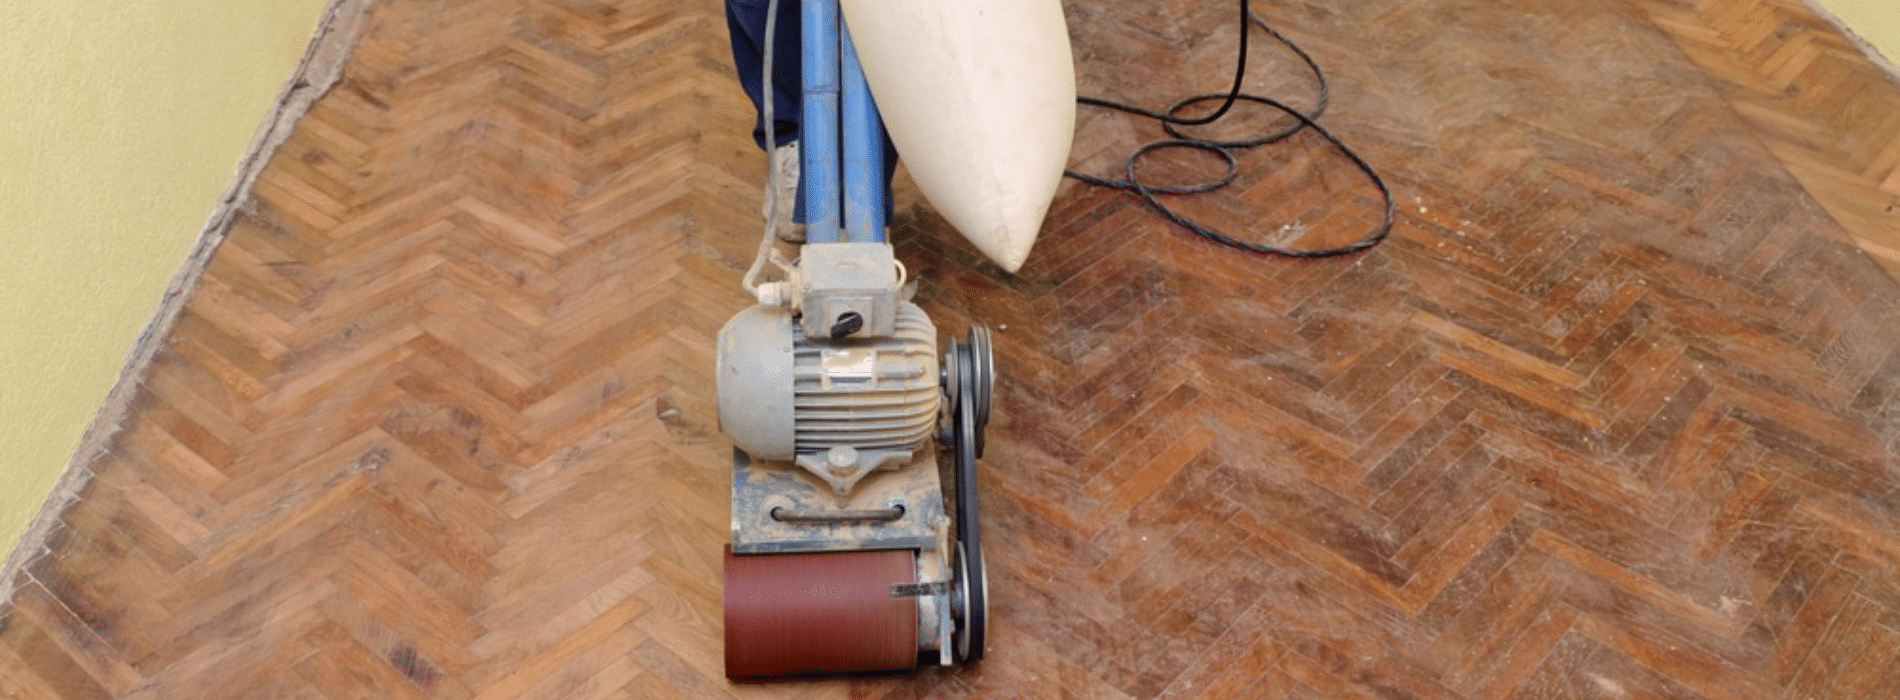 Mr Sander® using a Bona Scorpion, a 200mm drum sander, for sanding a herringbone floor in Greater London (North West). With a power of 1.5 kW, operating at 240V and 50Hz, they ensure a clean and efficient result by connecting it to a dust extraction system equipped with a HEPA filter.